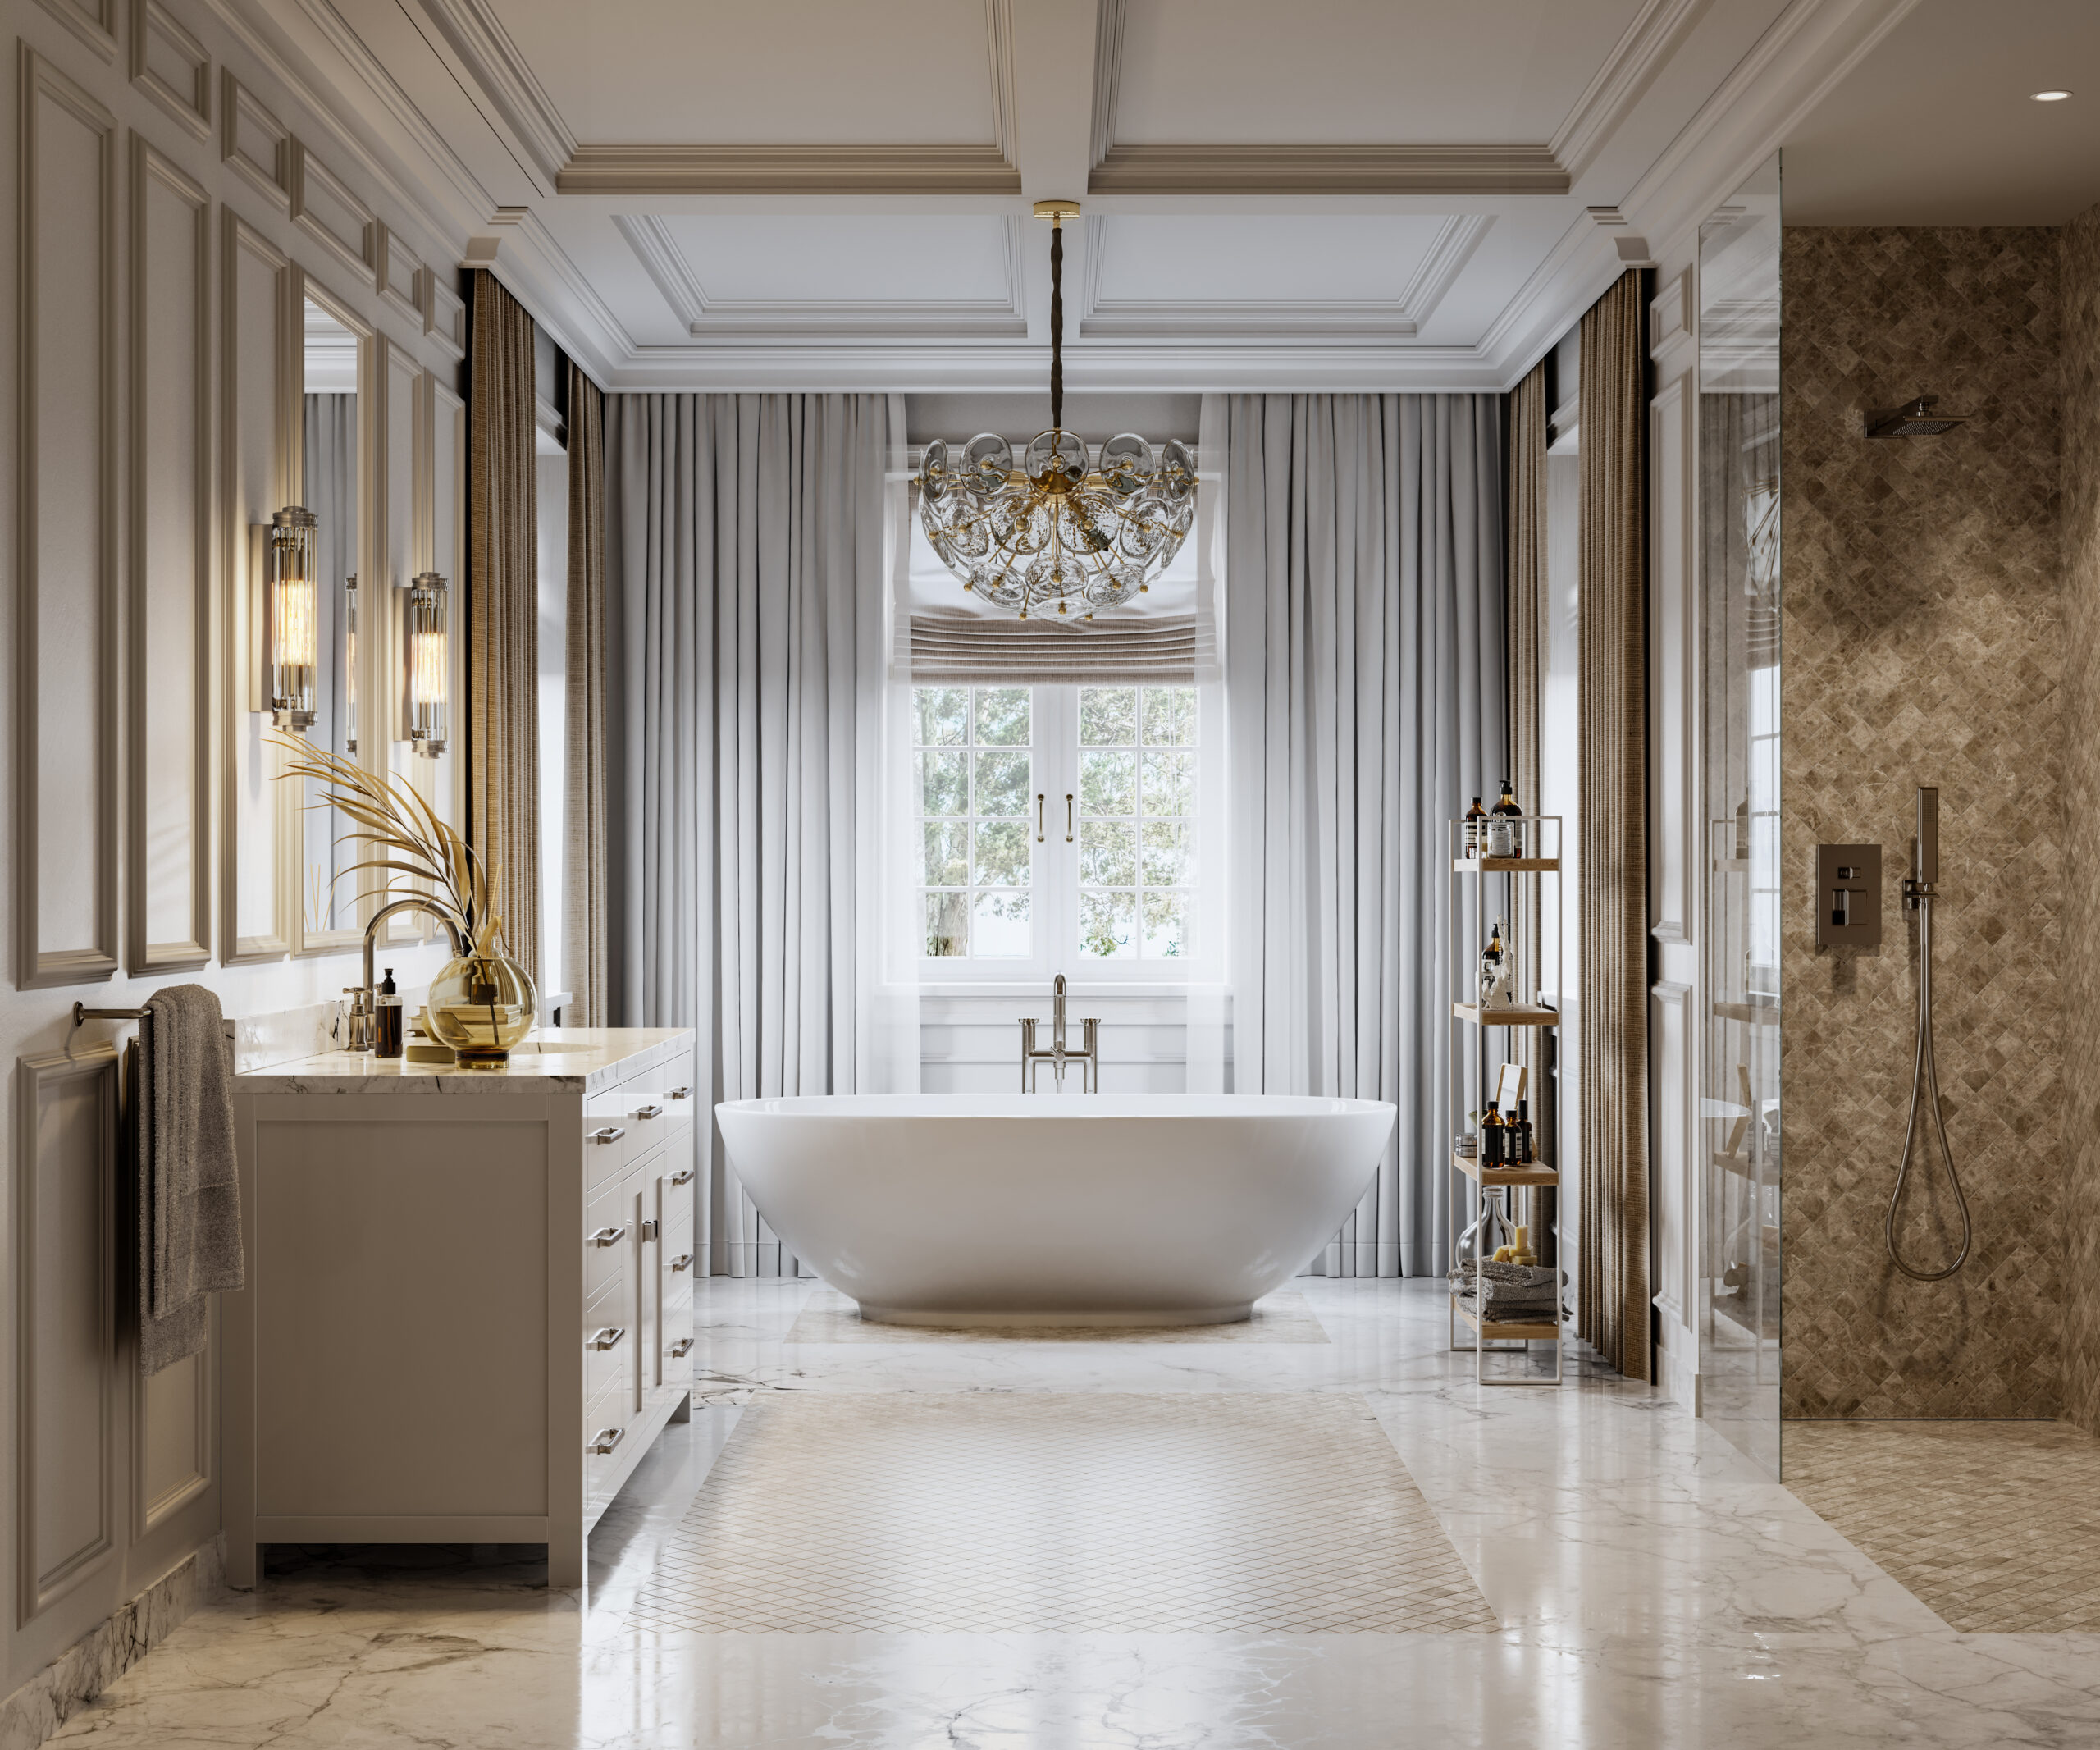 Full view of a beautiful bathroom from a digitally generated image